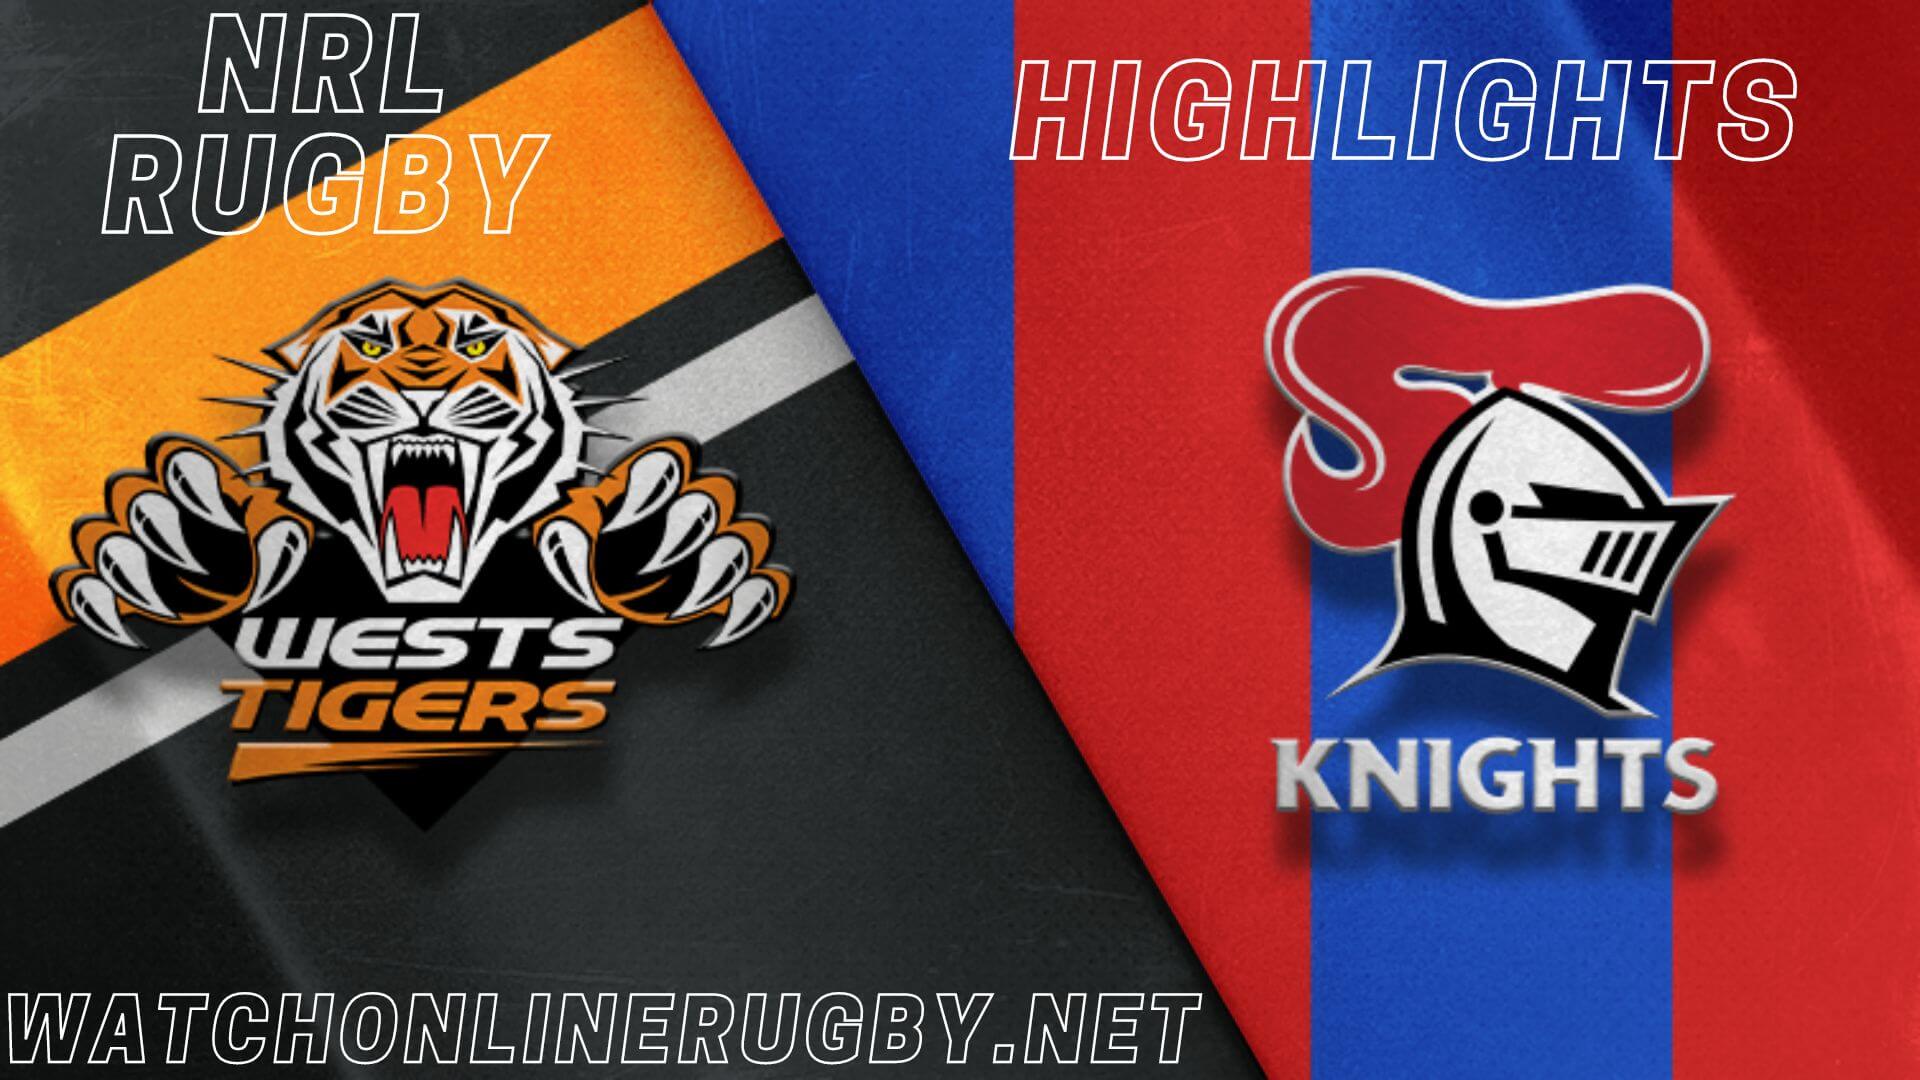 Wests Tigers Vs Knights Highlights RD 21 NRL Rugby